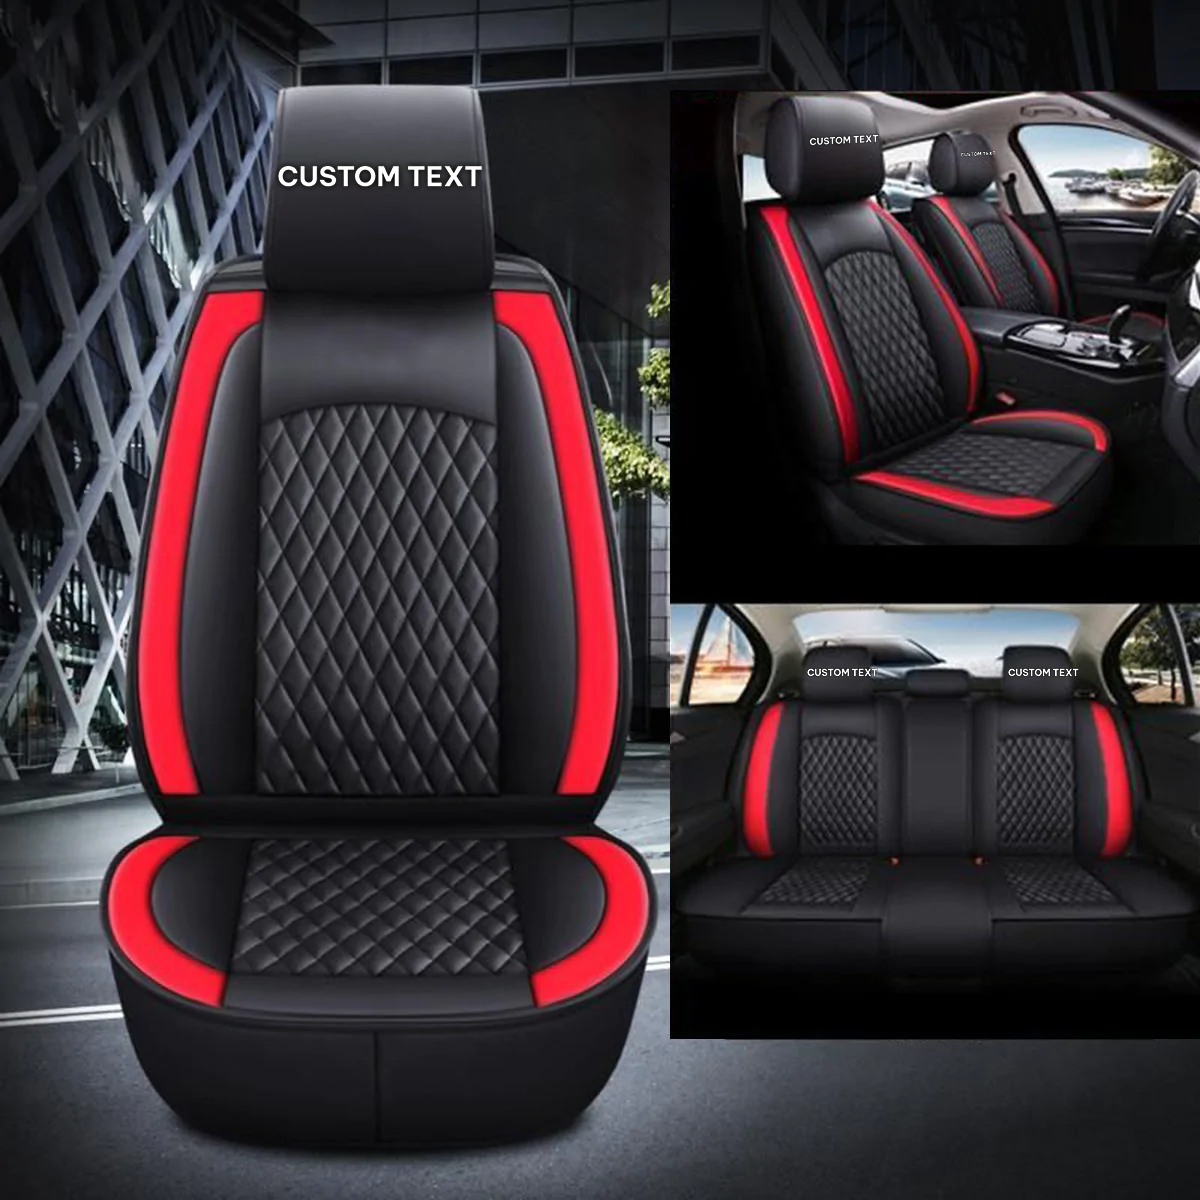 Custom Text For Seat Covers 5 Seats Full Set, Custom Fit For Your Cars, Leatherette Automotive Seat Cushion Protector Universal Fit, Vehicle Auto Interior Decor CH13988